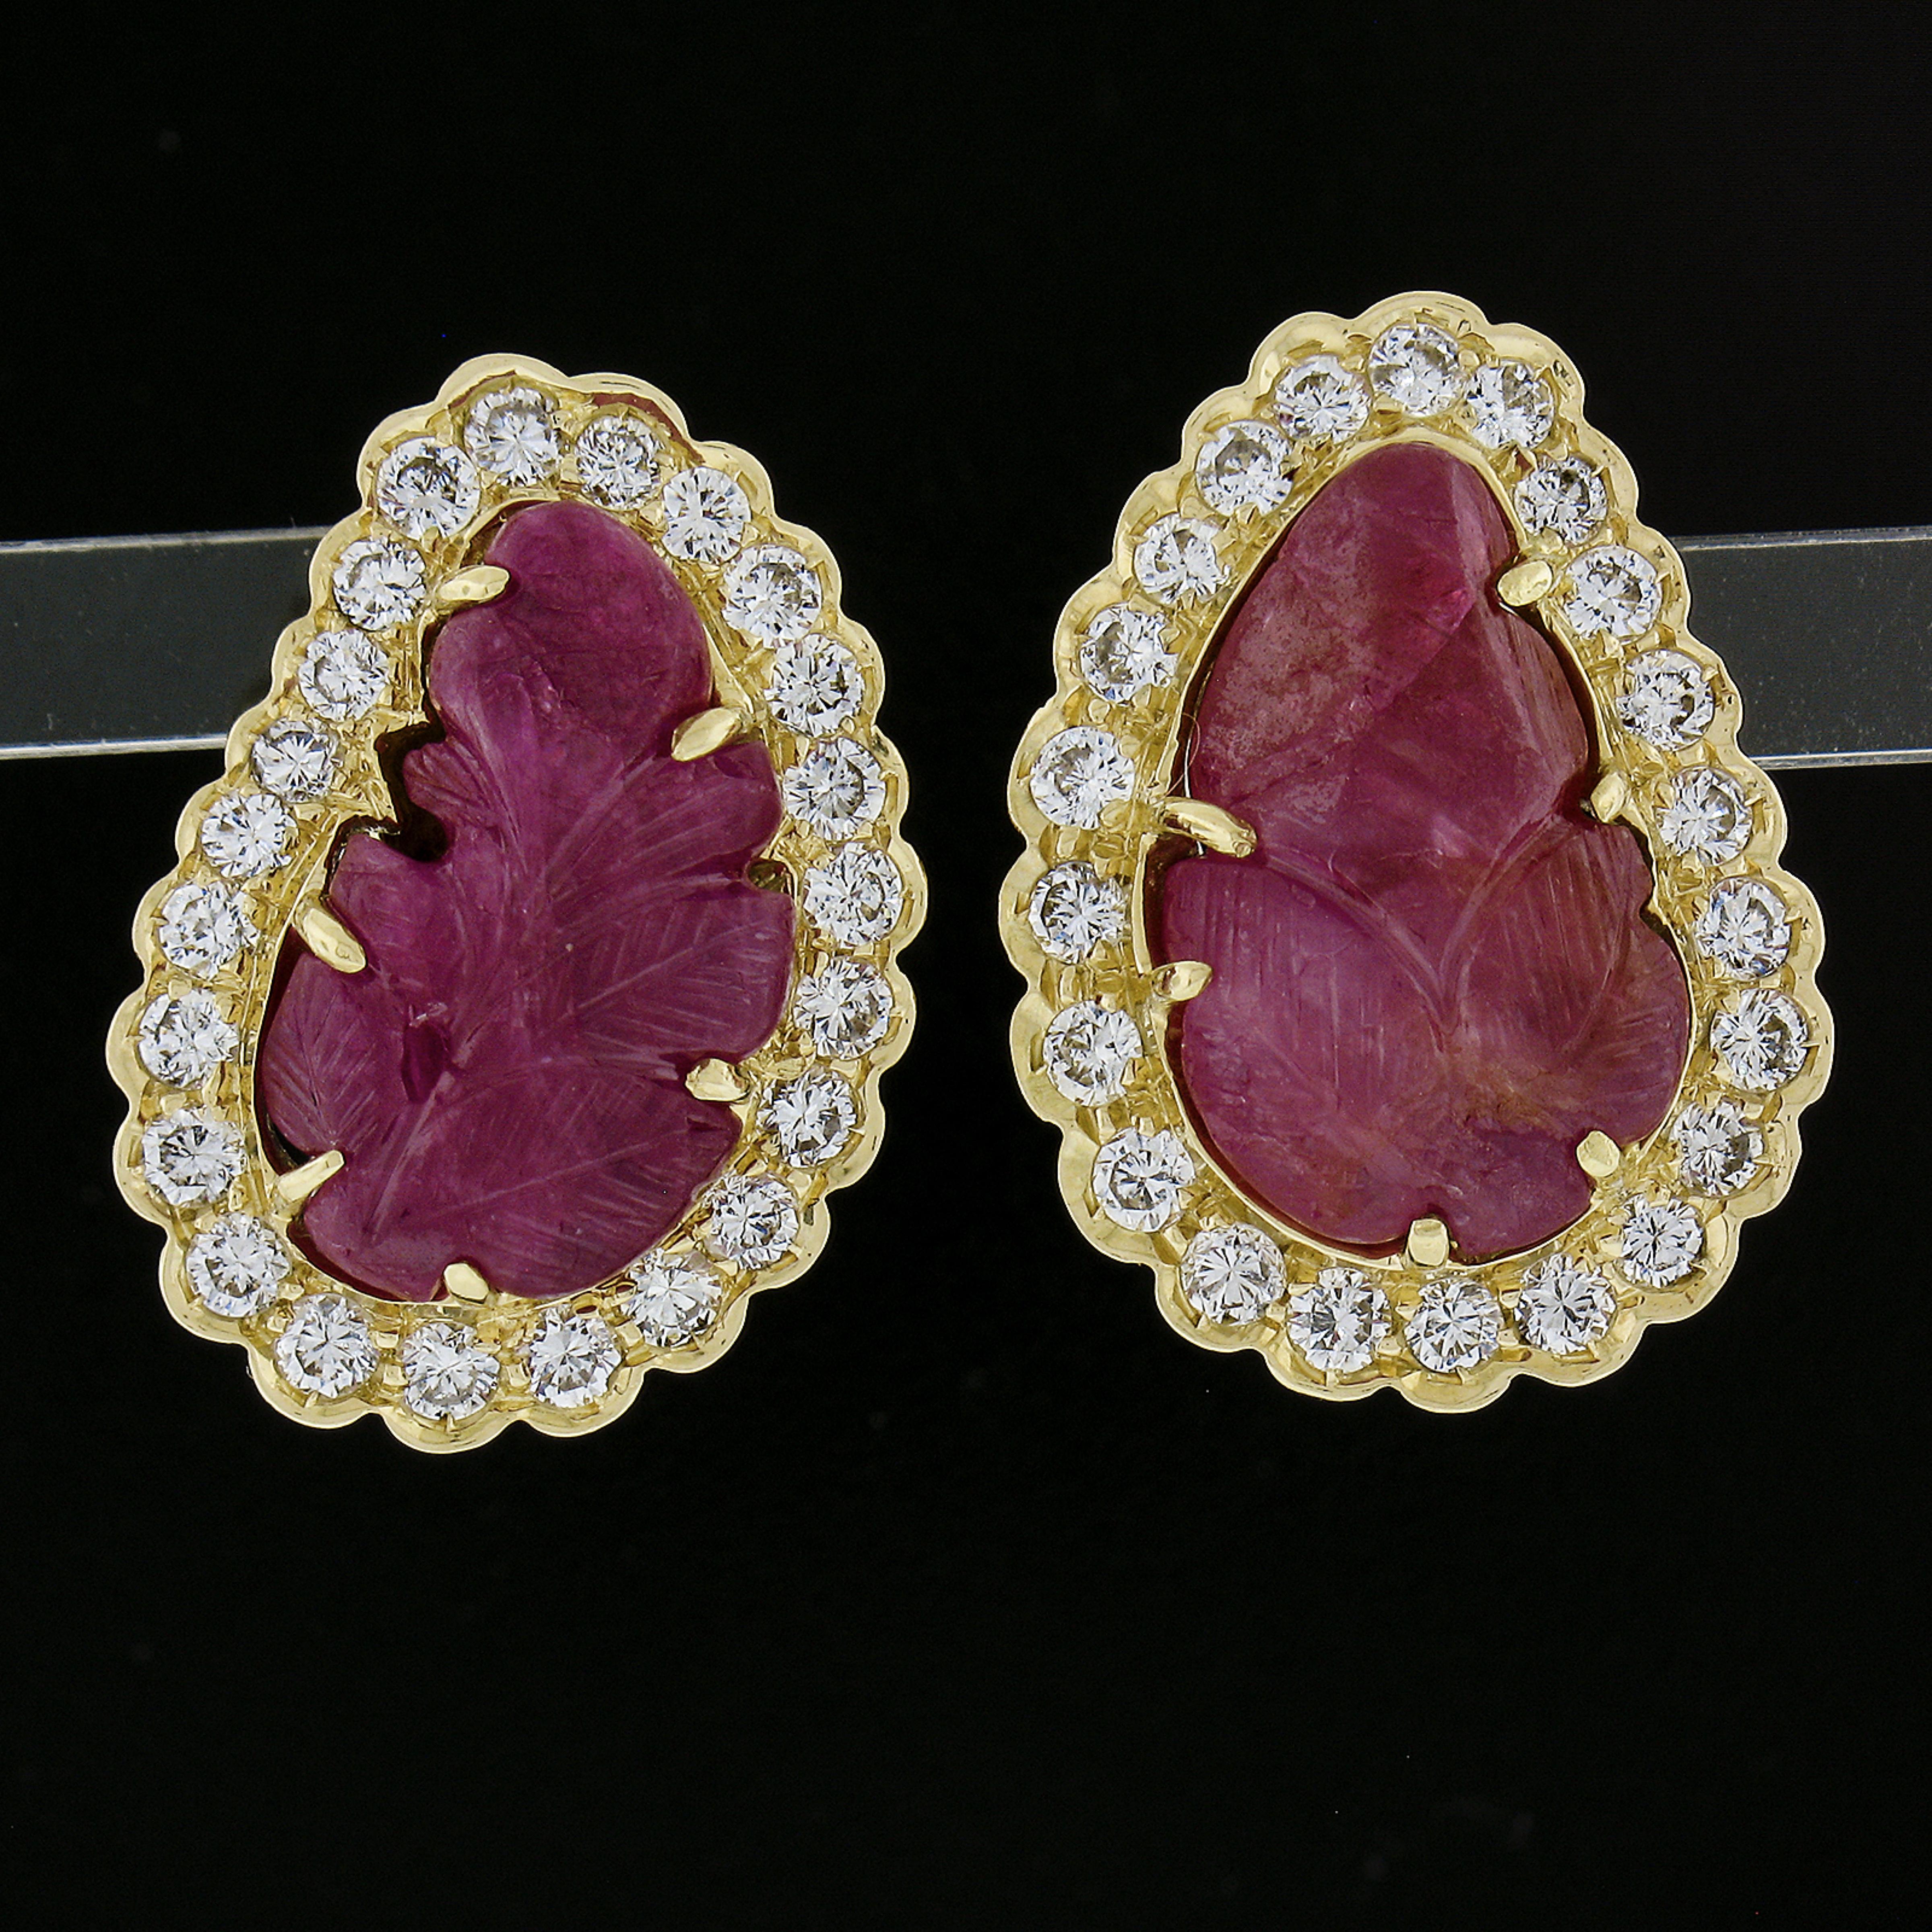 --Stone(s):--
(2) Natural Genuine Rubies - Carved Leaf Shape - Prong Set - Purplish-Red Color w/ Natural Inclusion and some surface Reaching - 15.9x9.3mm each (approx.)
(45) Natural Genuine Diamonds - Round Brilliant Cut - Pave Set - G-I Color -